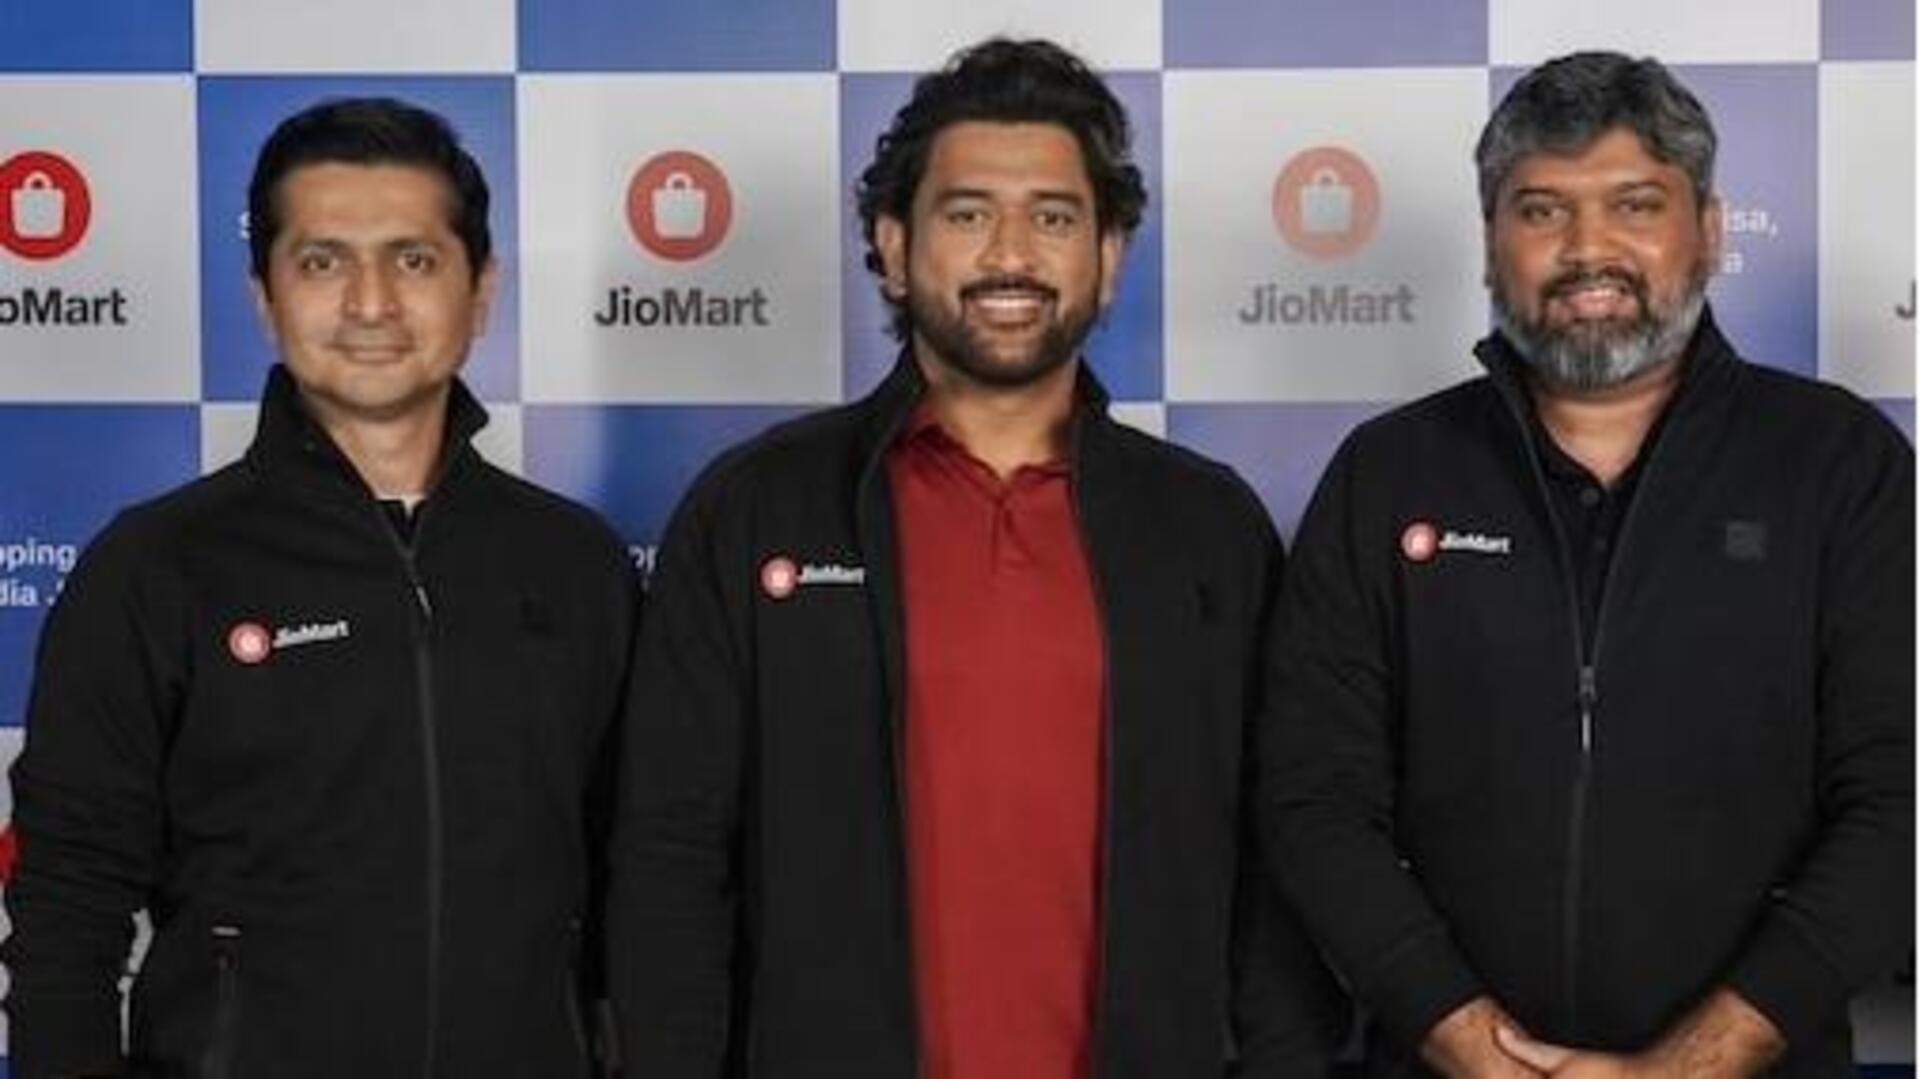 JioMart ropes in MS Dhoni as its brand ambassador